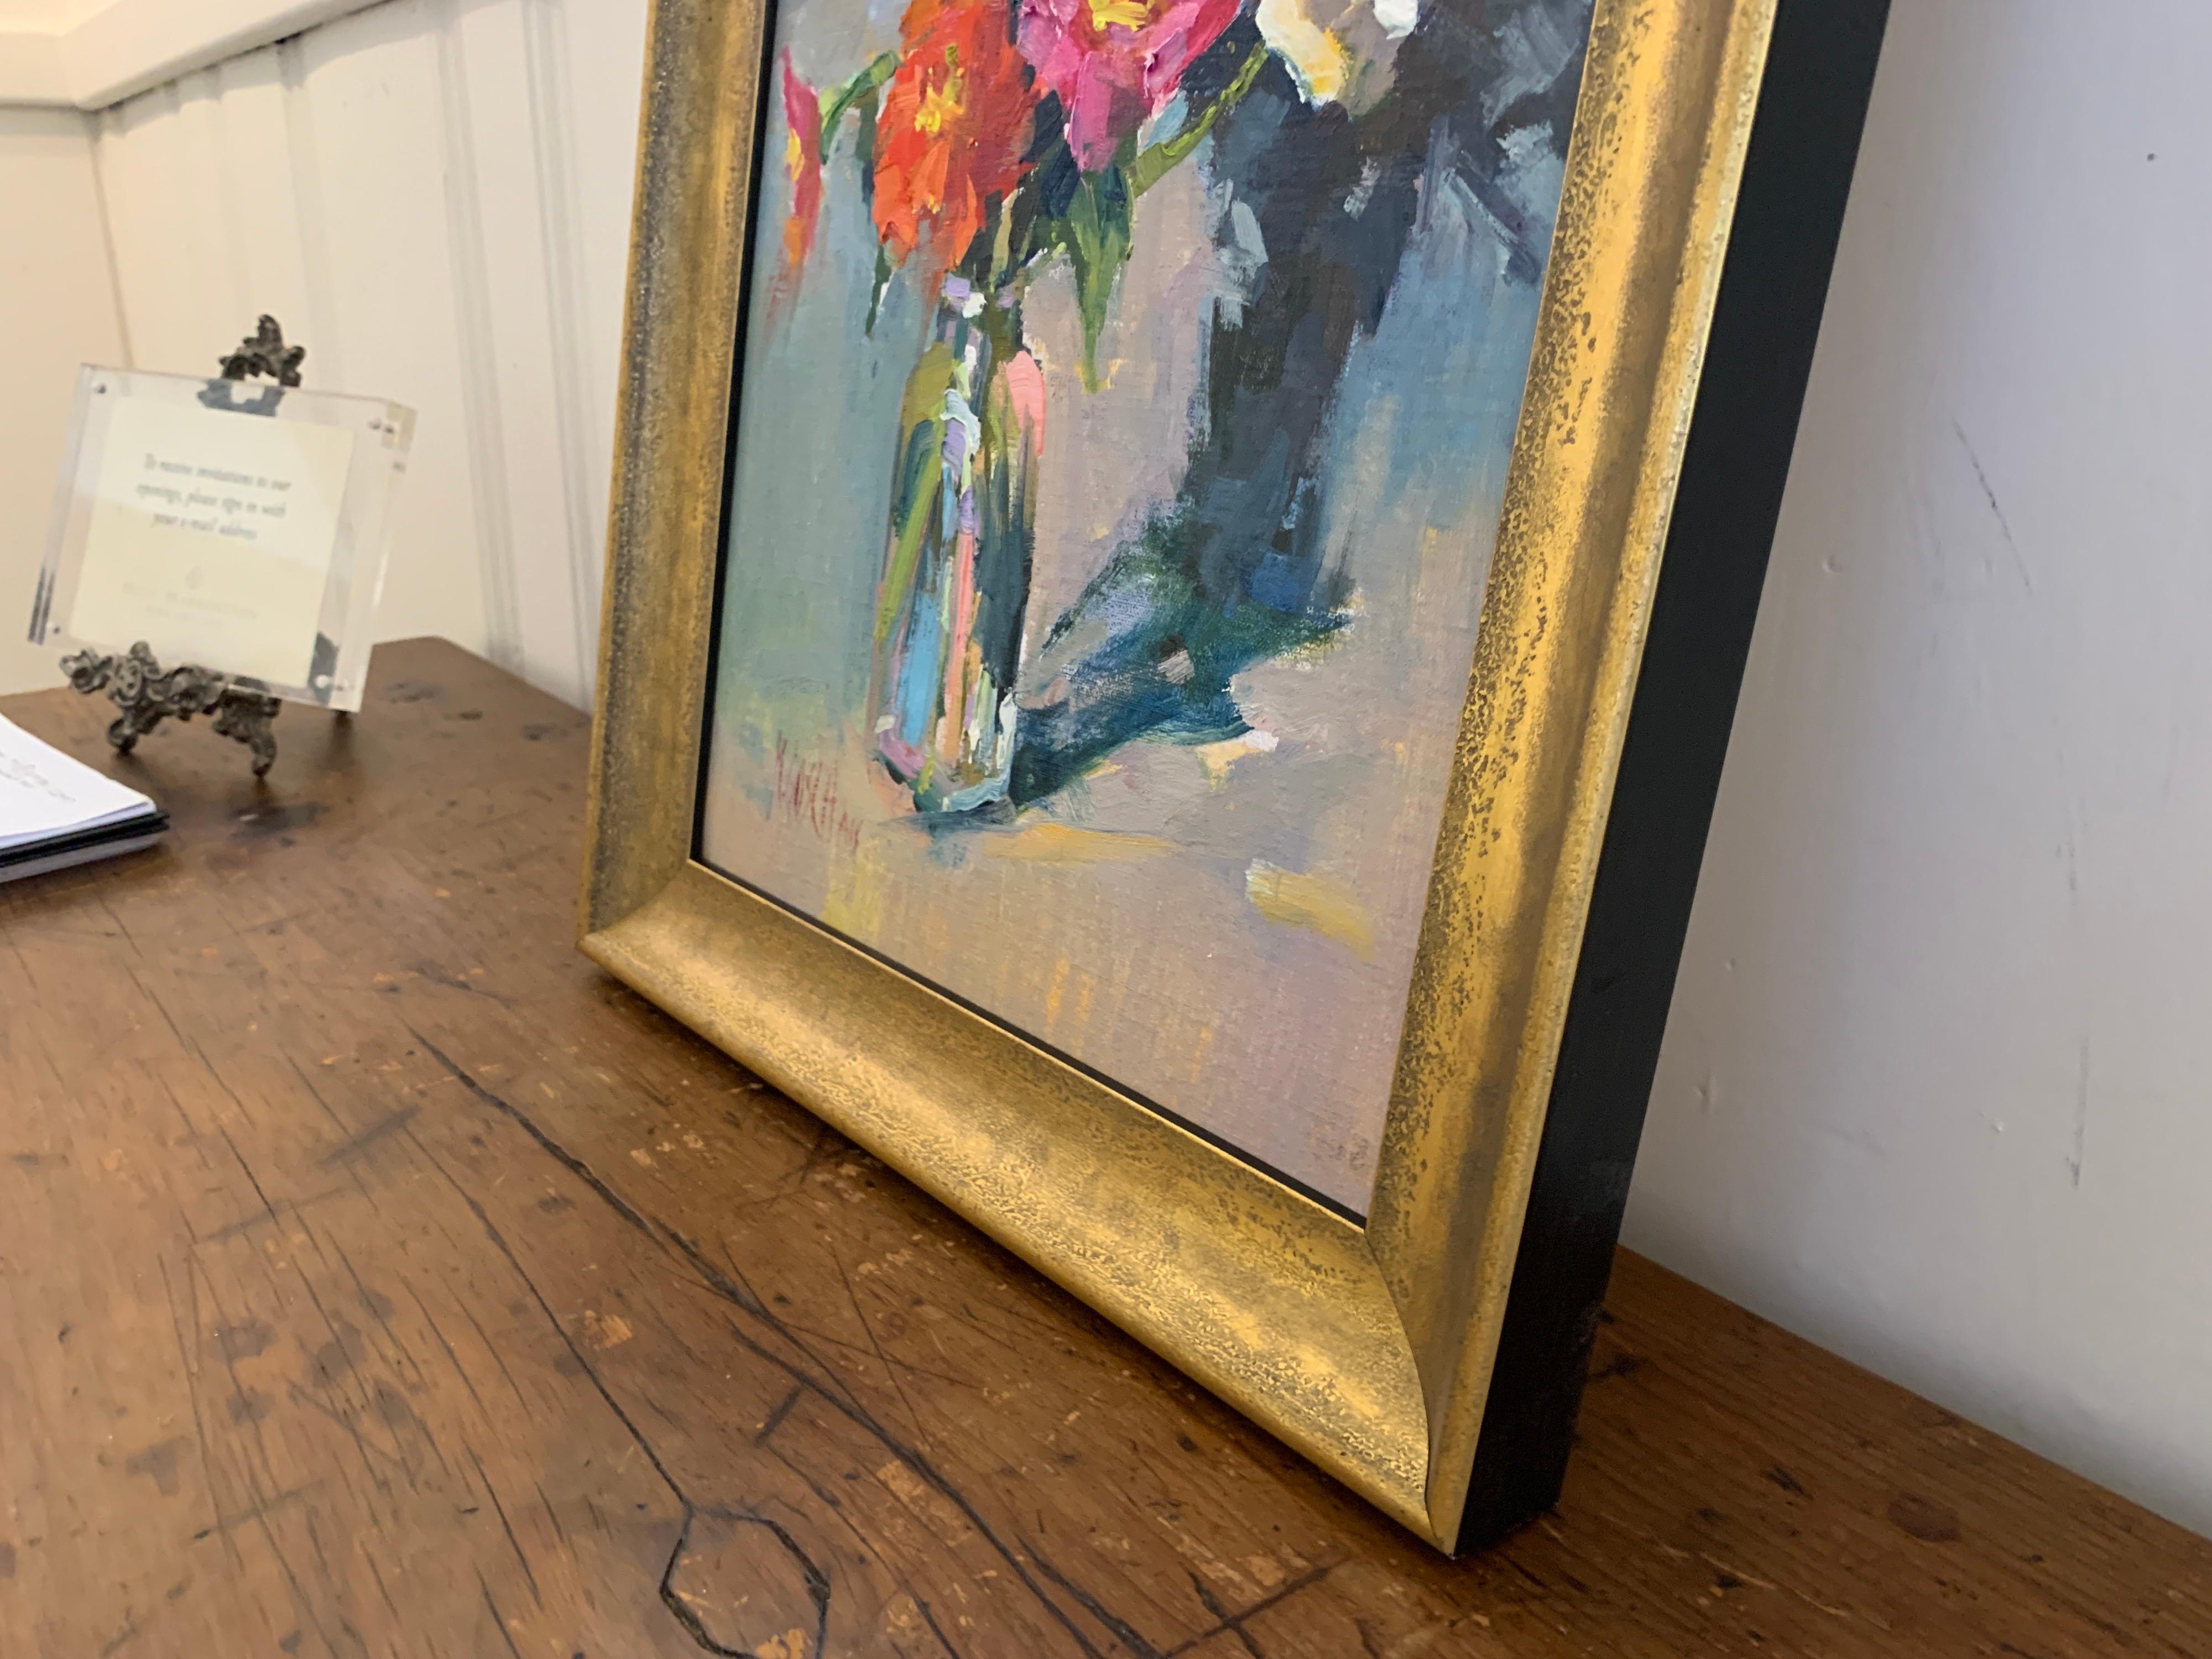 Fleurs III by Millie Gosch, Small Framed Oil on Board Still-Life Painting 3